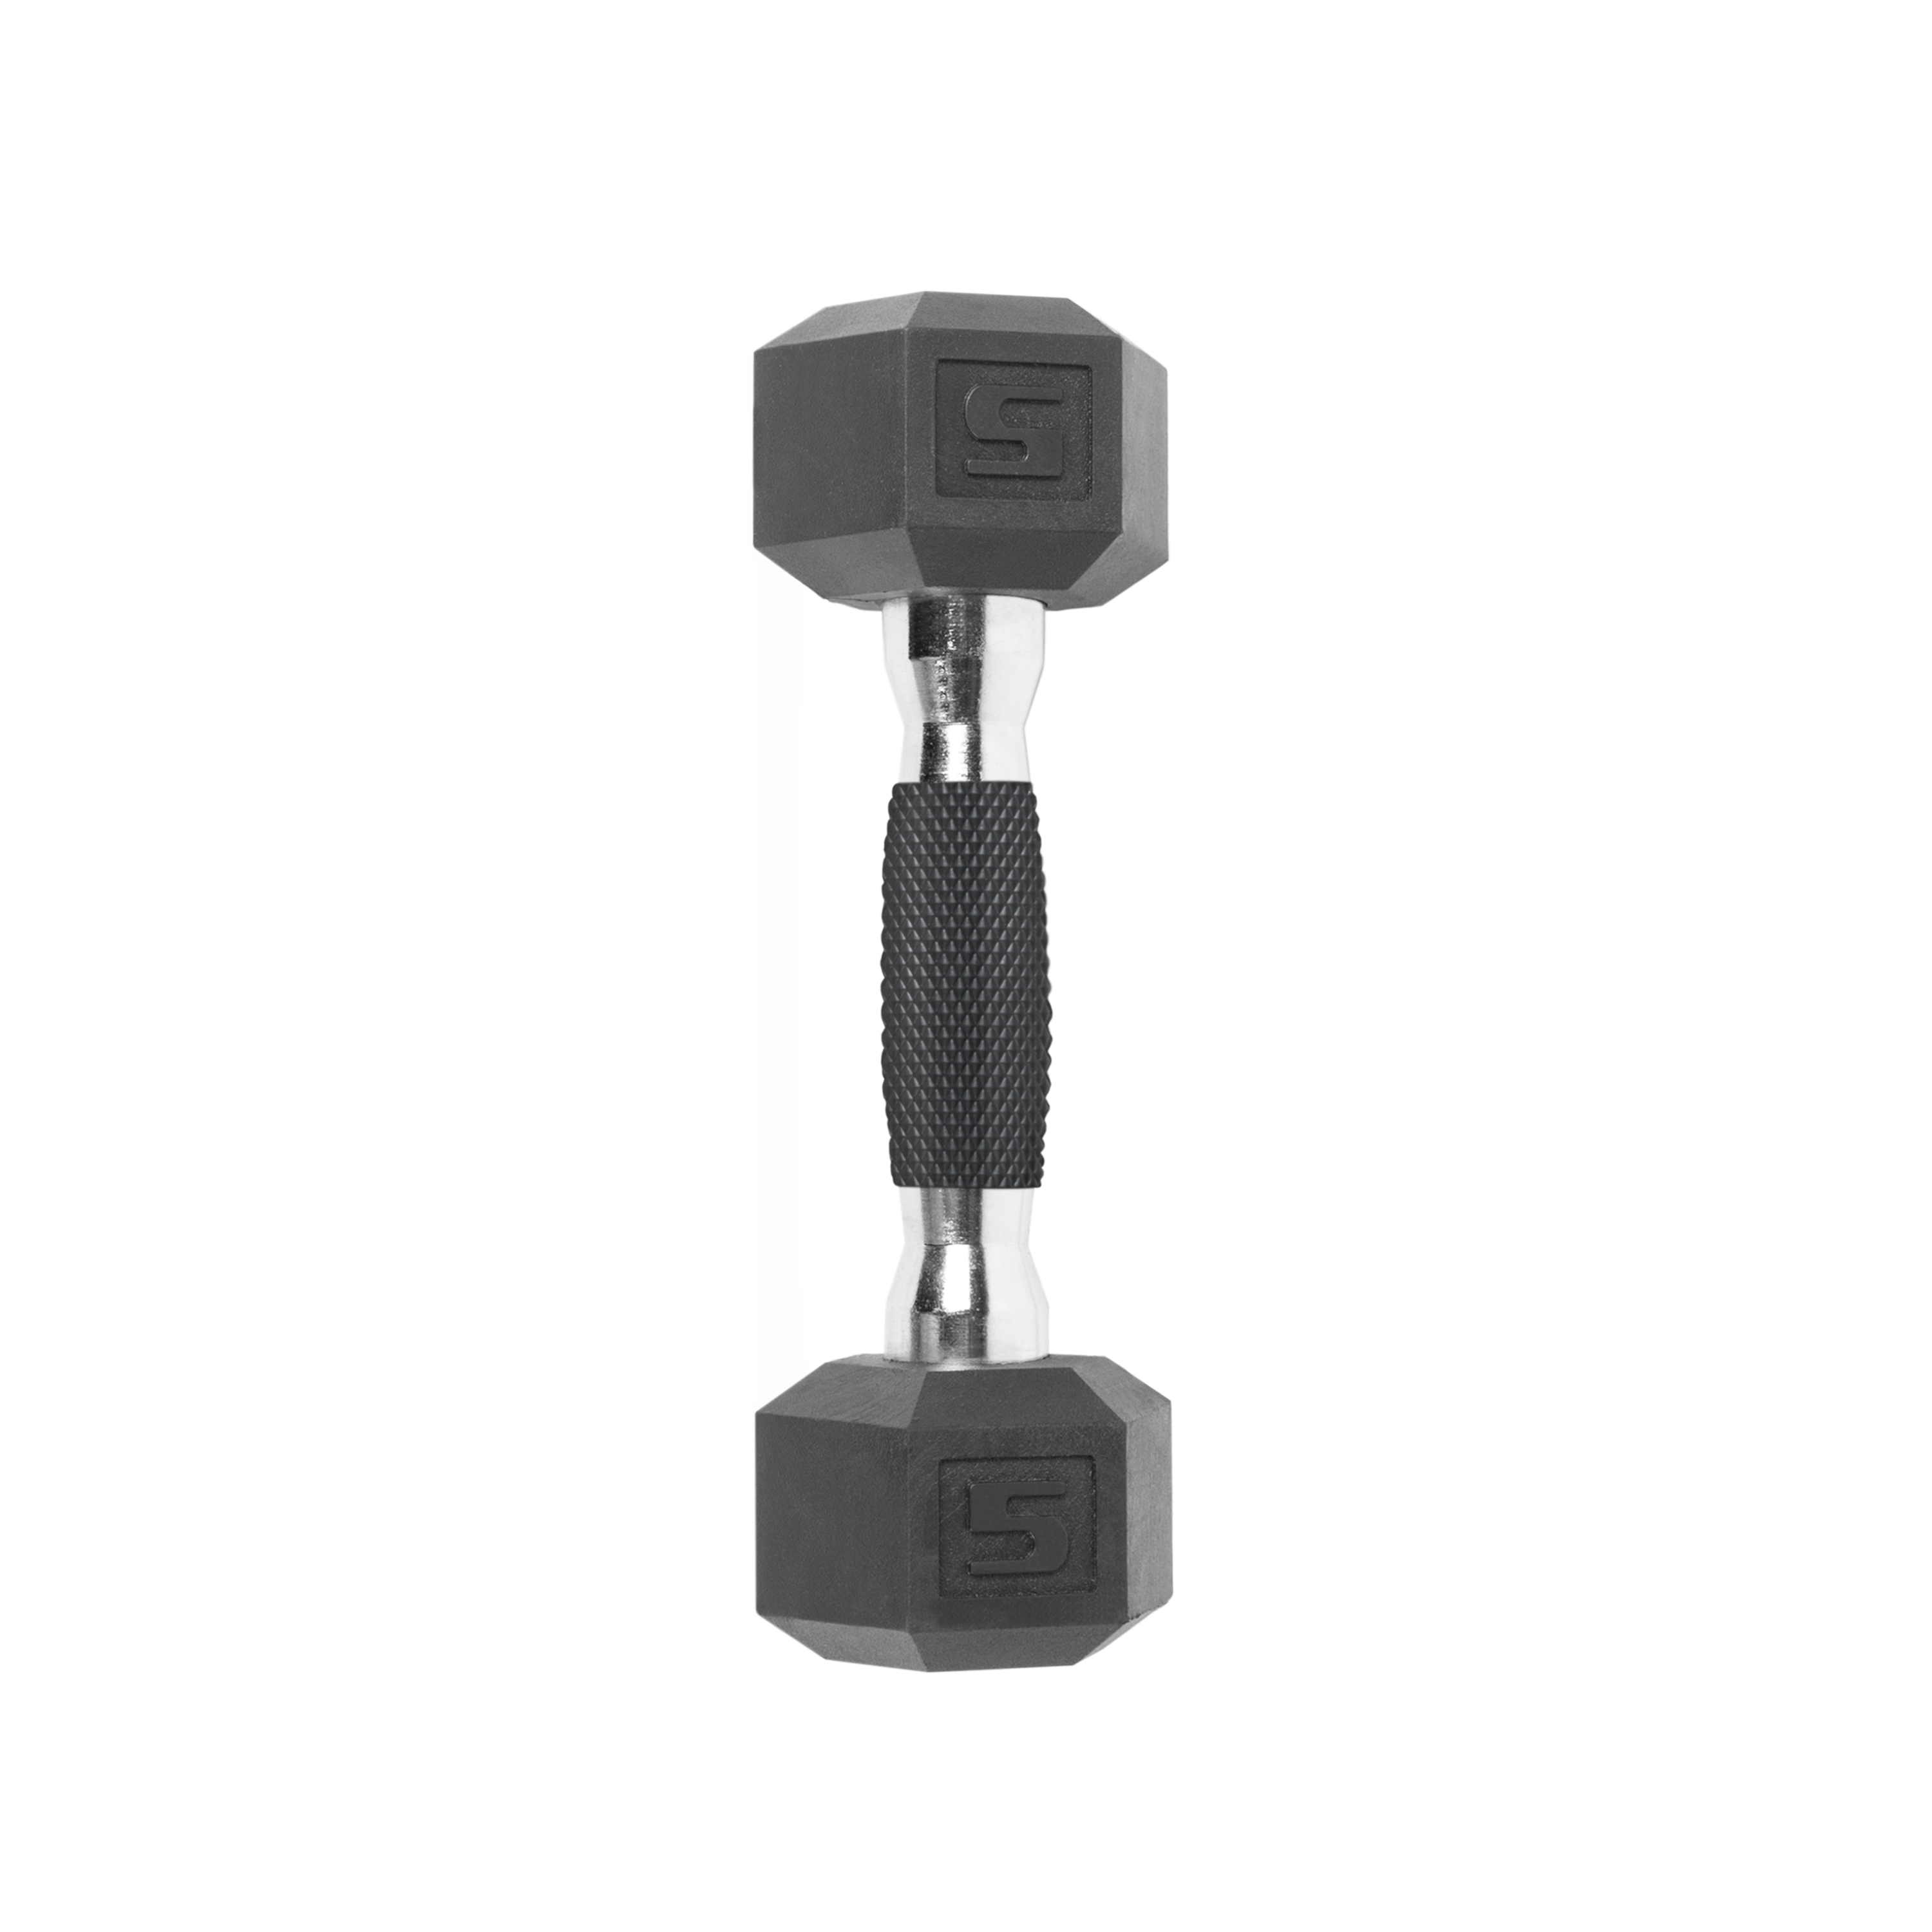 CAP Barbell Coated Dumbbells, Single, 5-50 Pounds - image 3 of 6